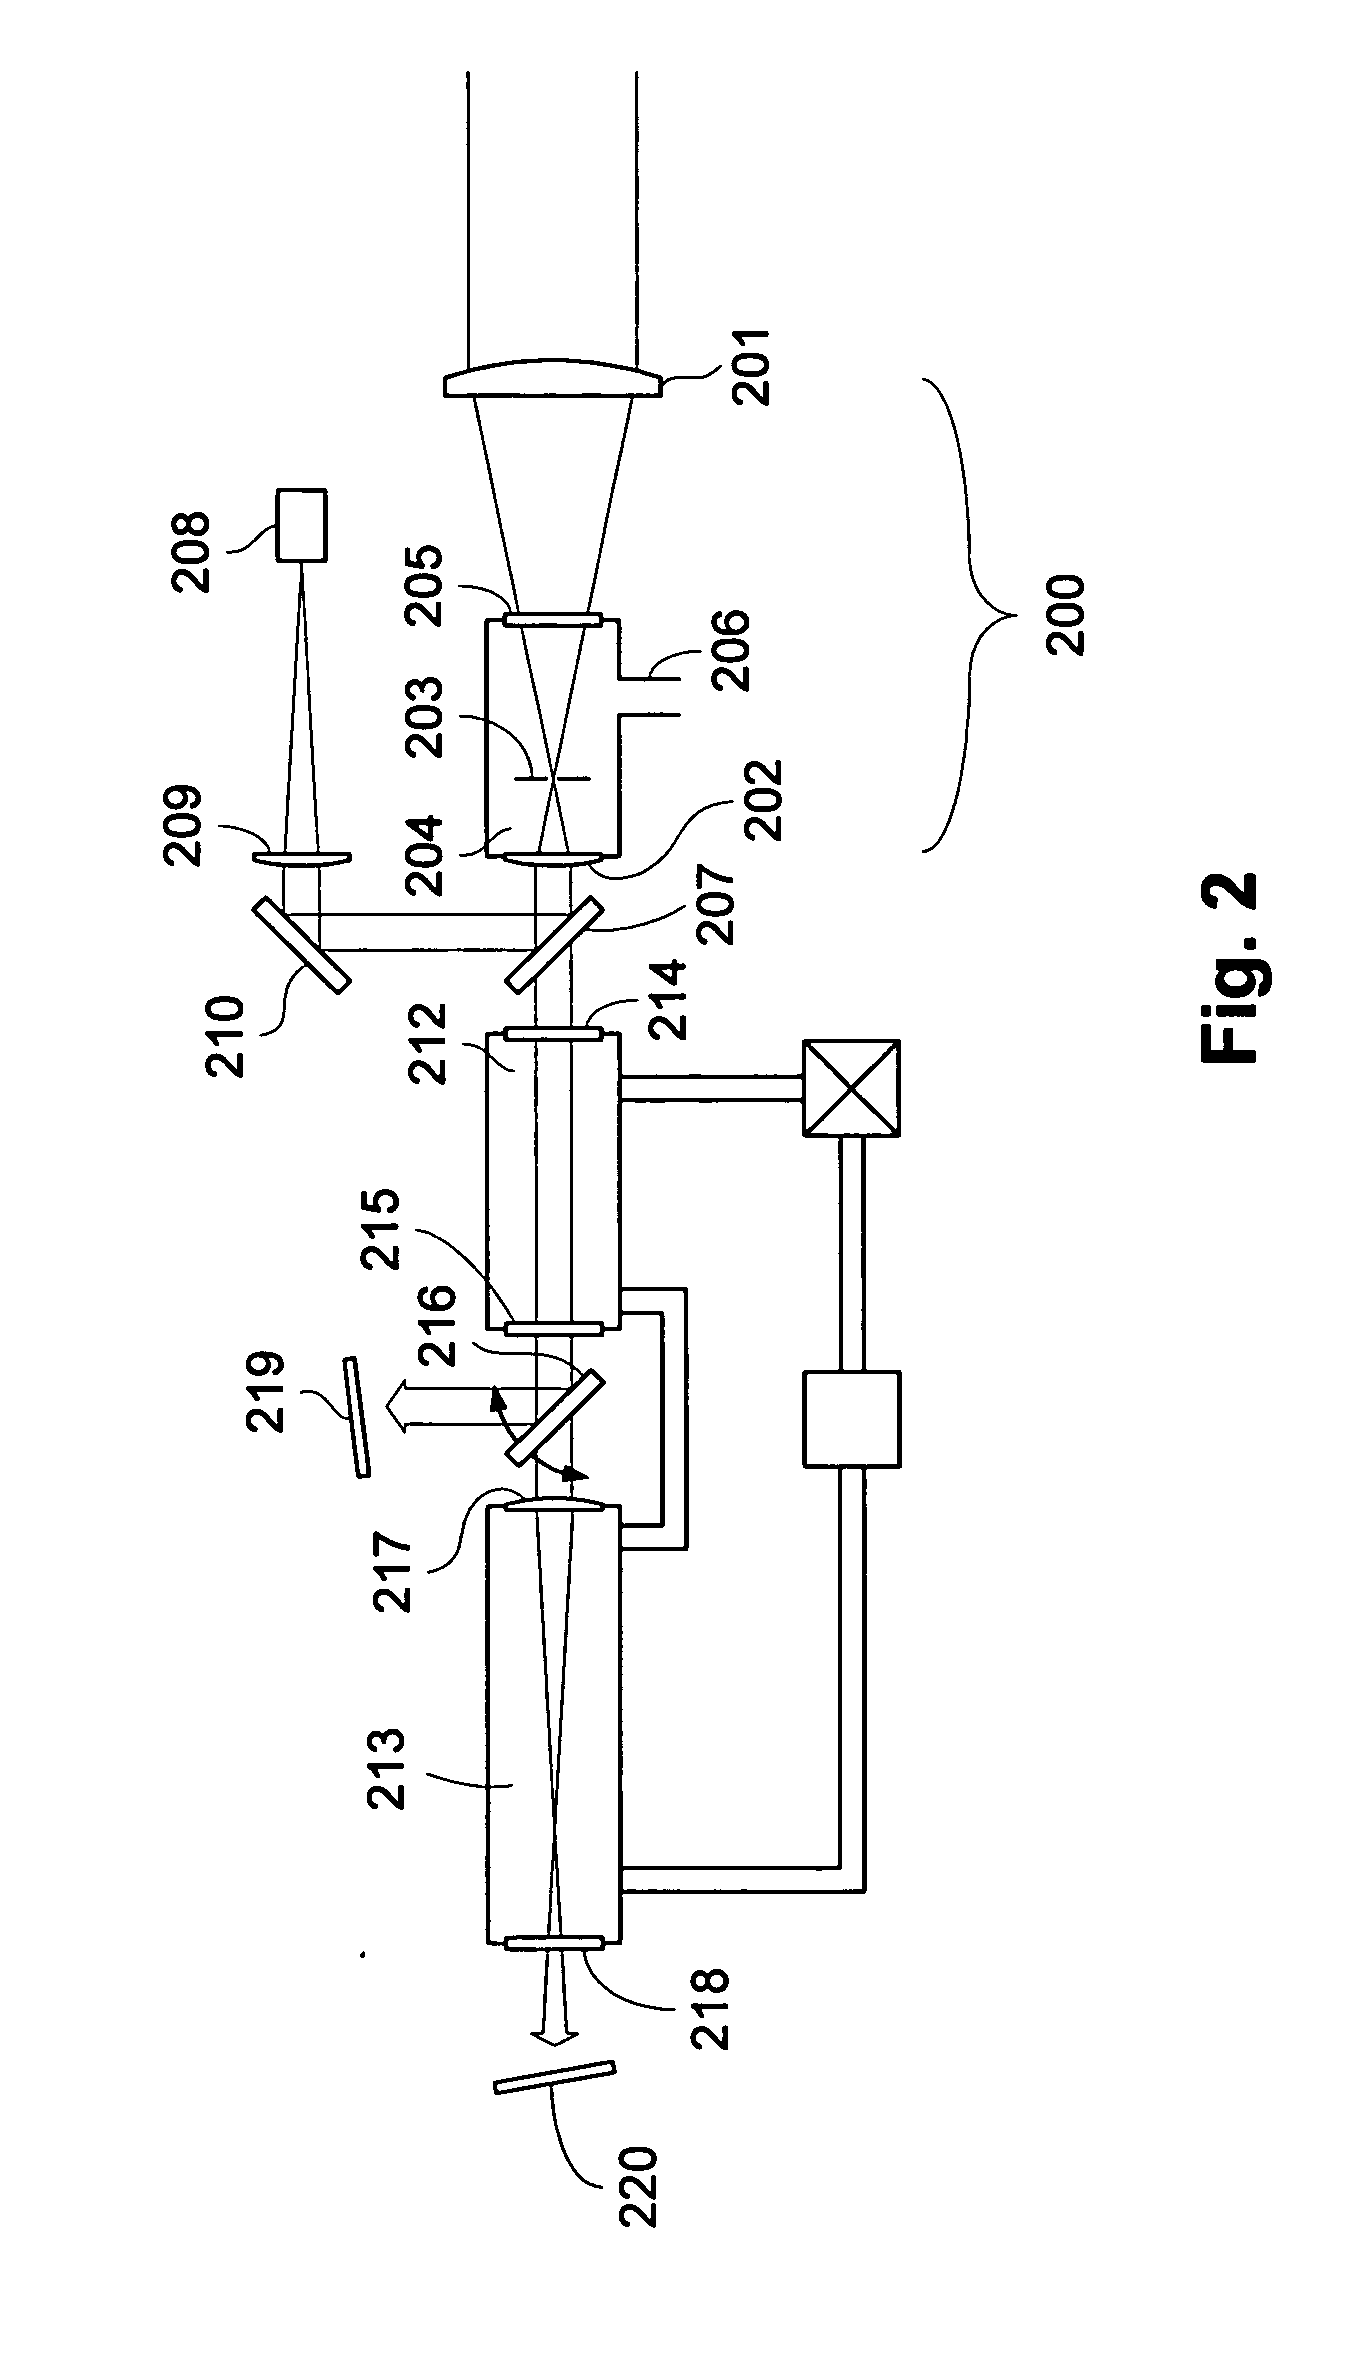 Relay telescope, high power laser alignment system, and laser peening method and system using same